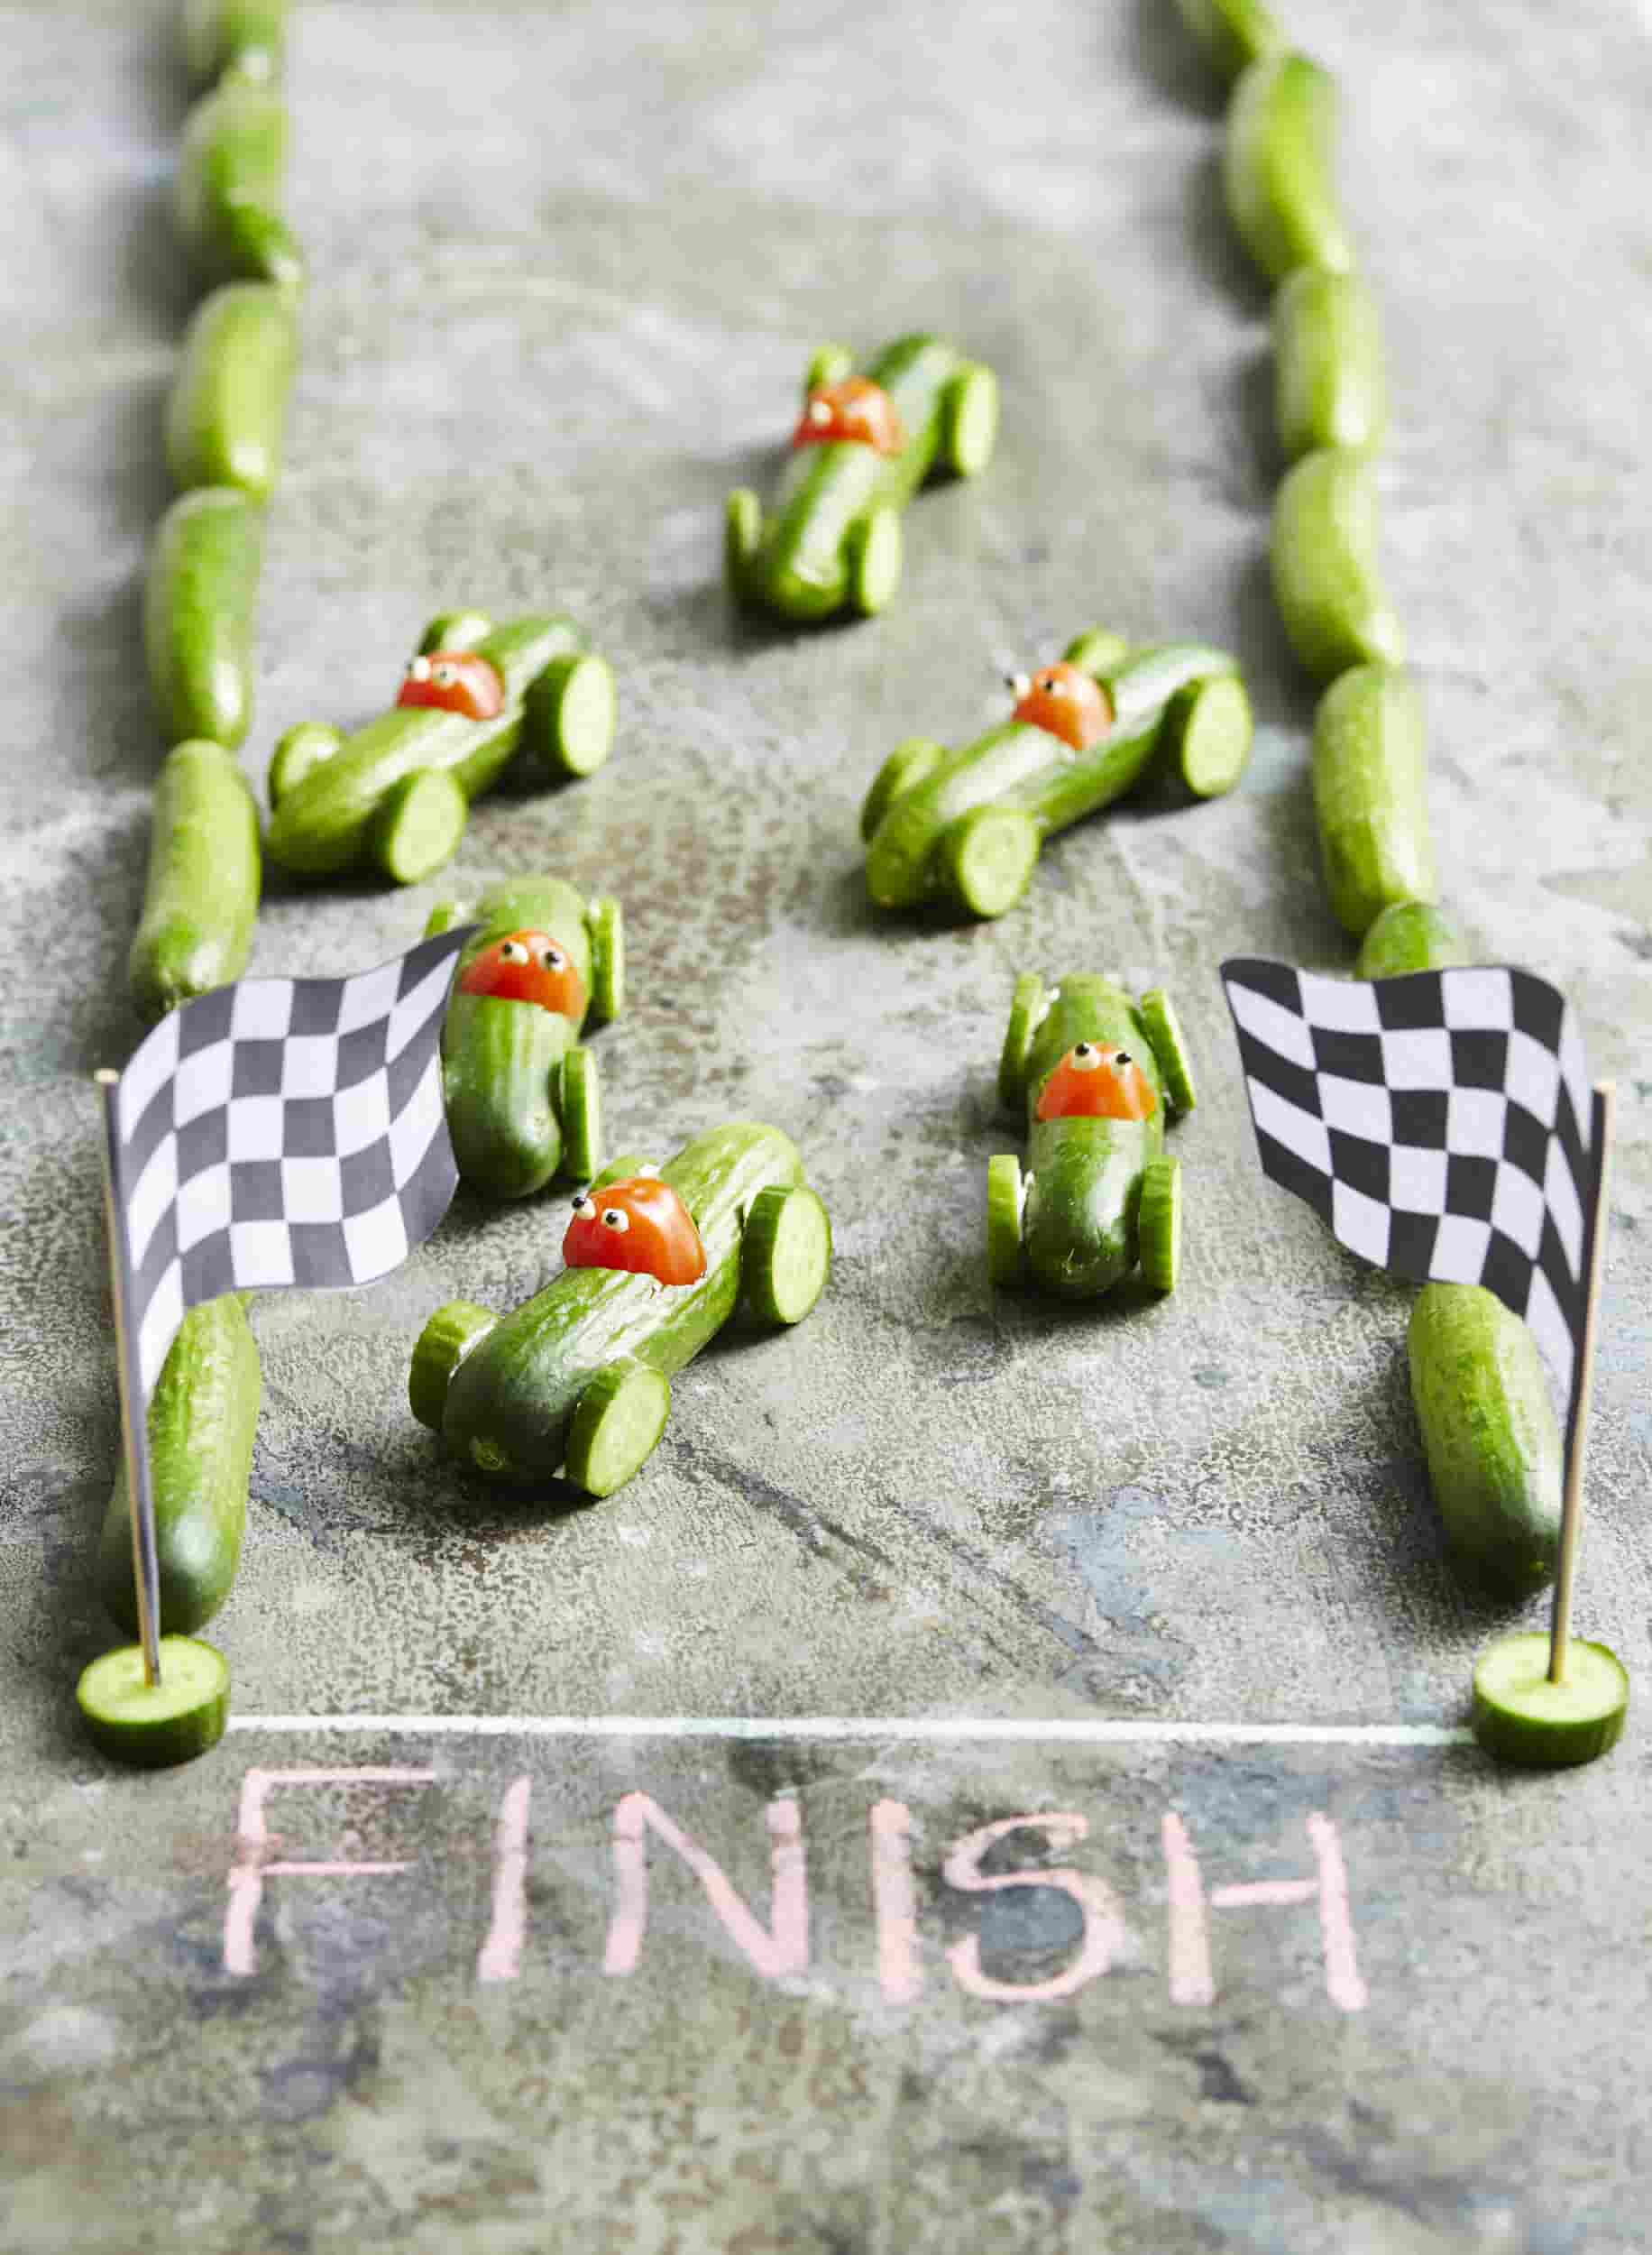 Edible racing cars made out of Qukes cucumbers and medley tomatoes.